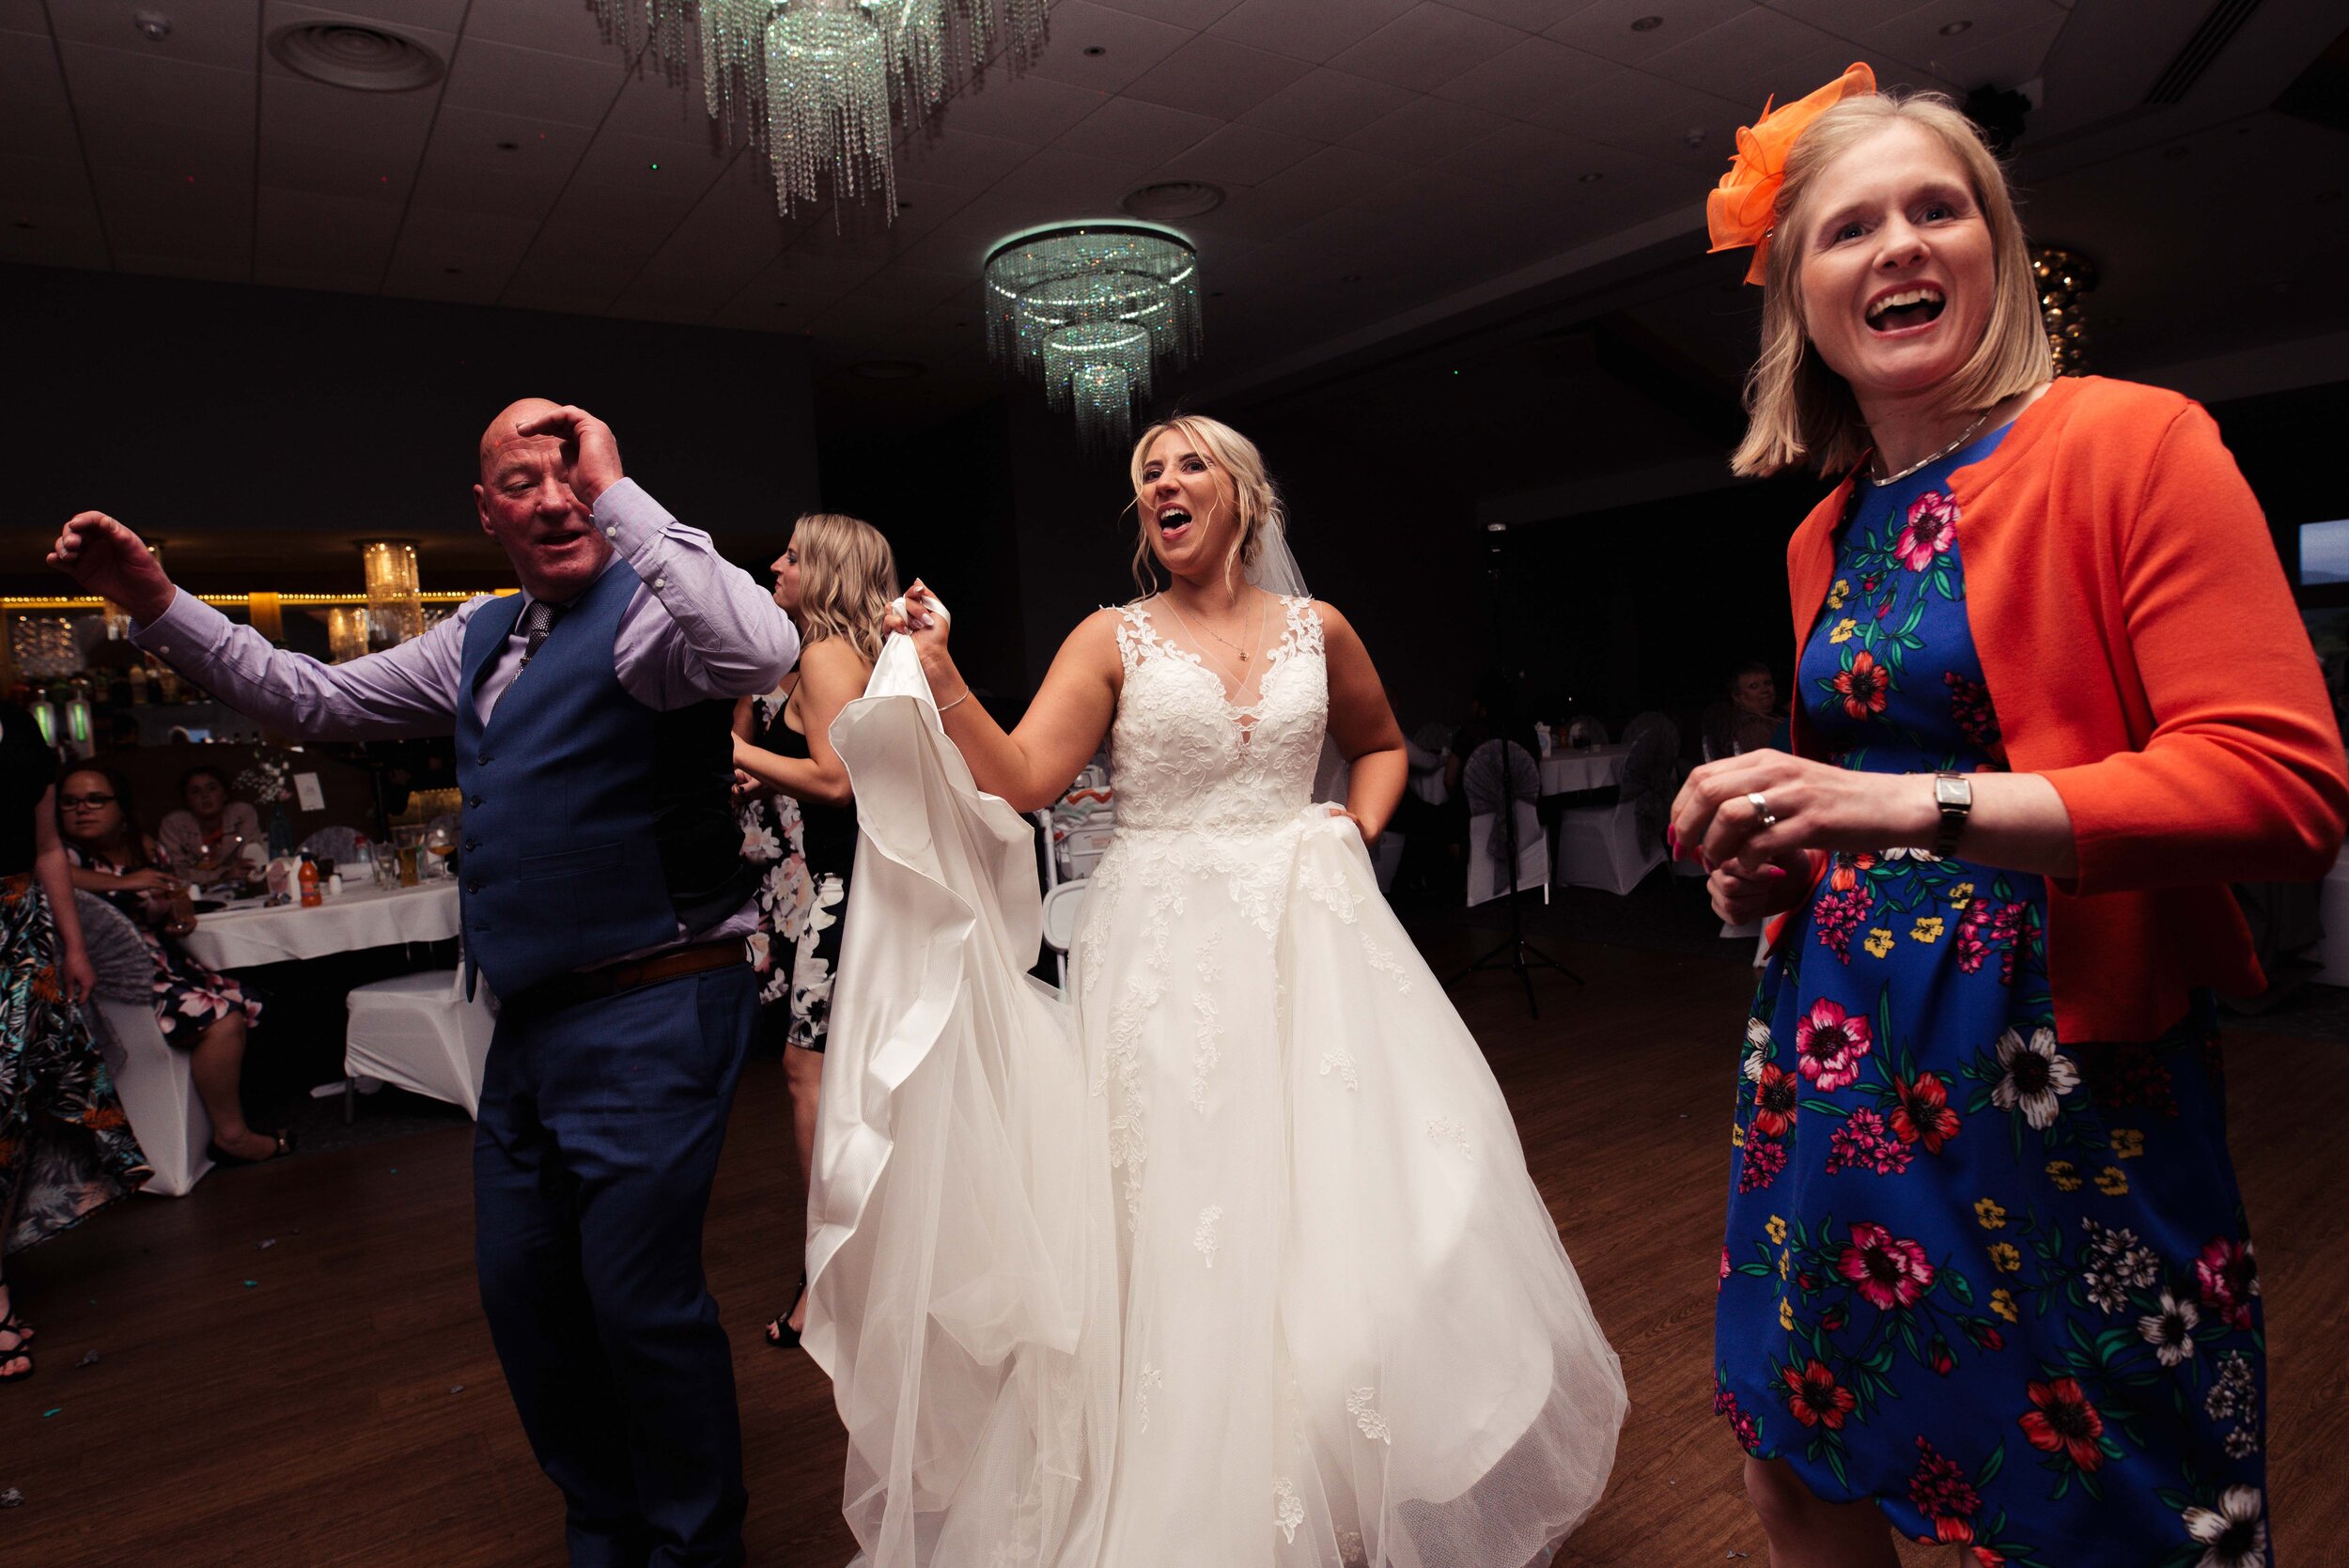 The bride dances with her guests on the dance floor